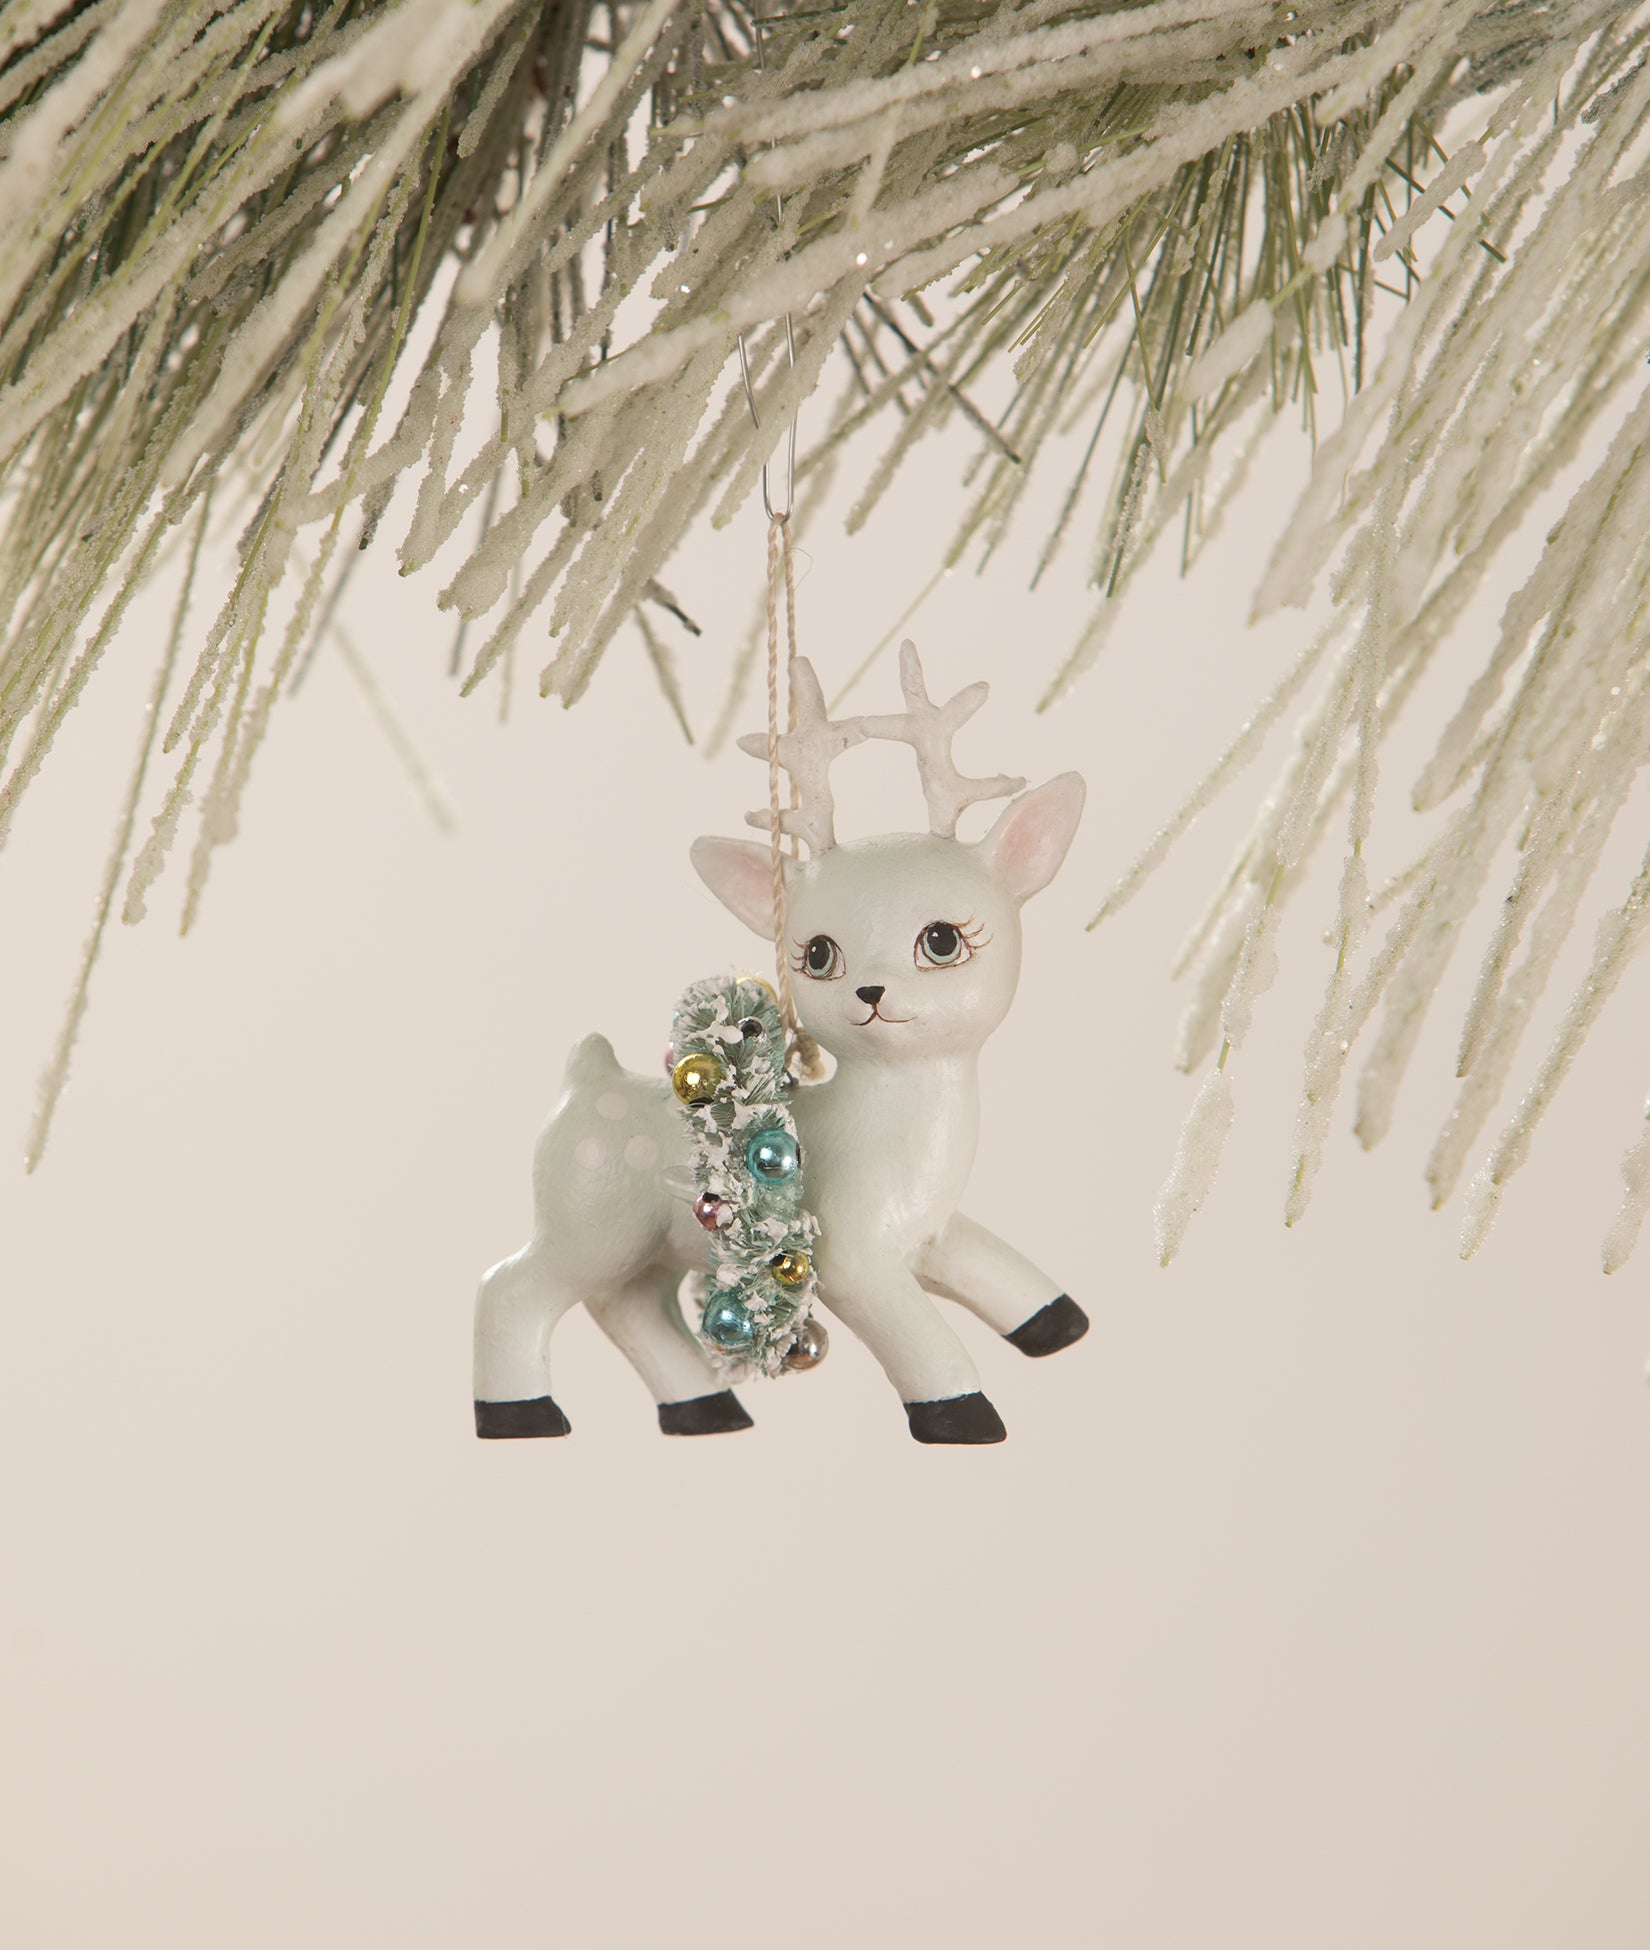 Retro Pastel Blue Rindeer with Wreath Ornament by Bethany Lowe